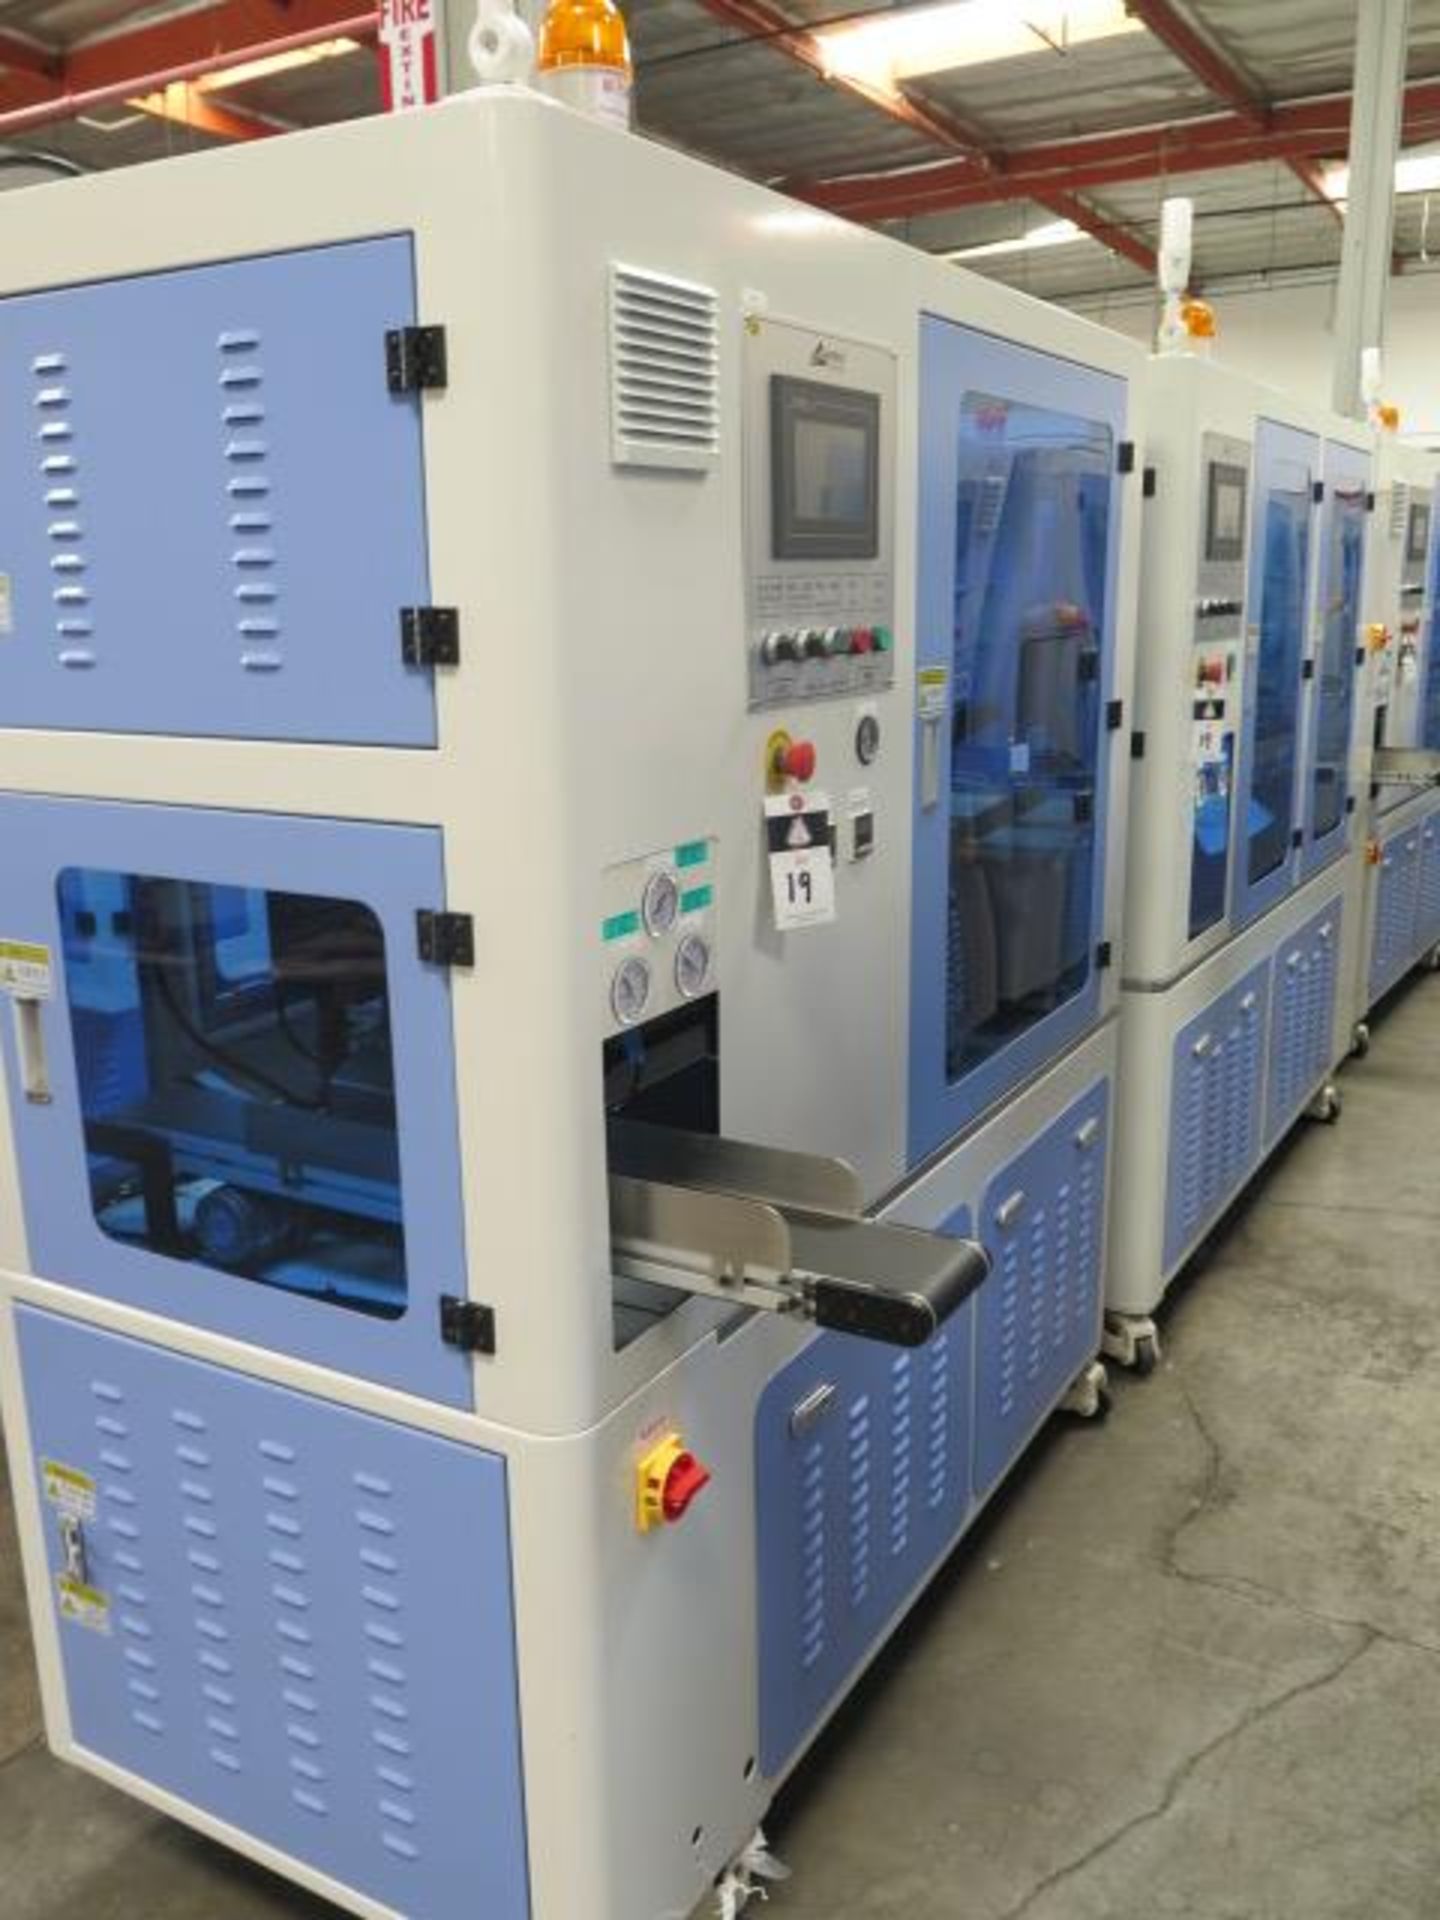 2/2021 Gereke mdl. GRK-TWO1 Cassette Assembly and Packaging Line s/n GRK20210220018 , SOLD AS IS